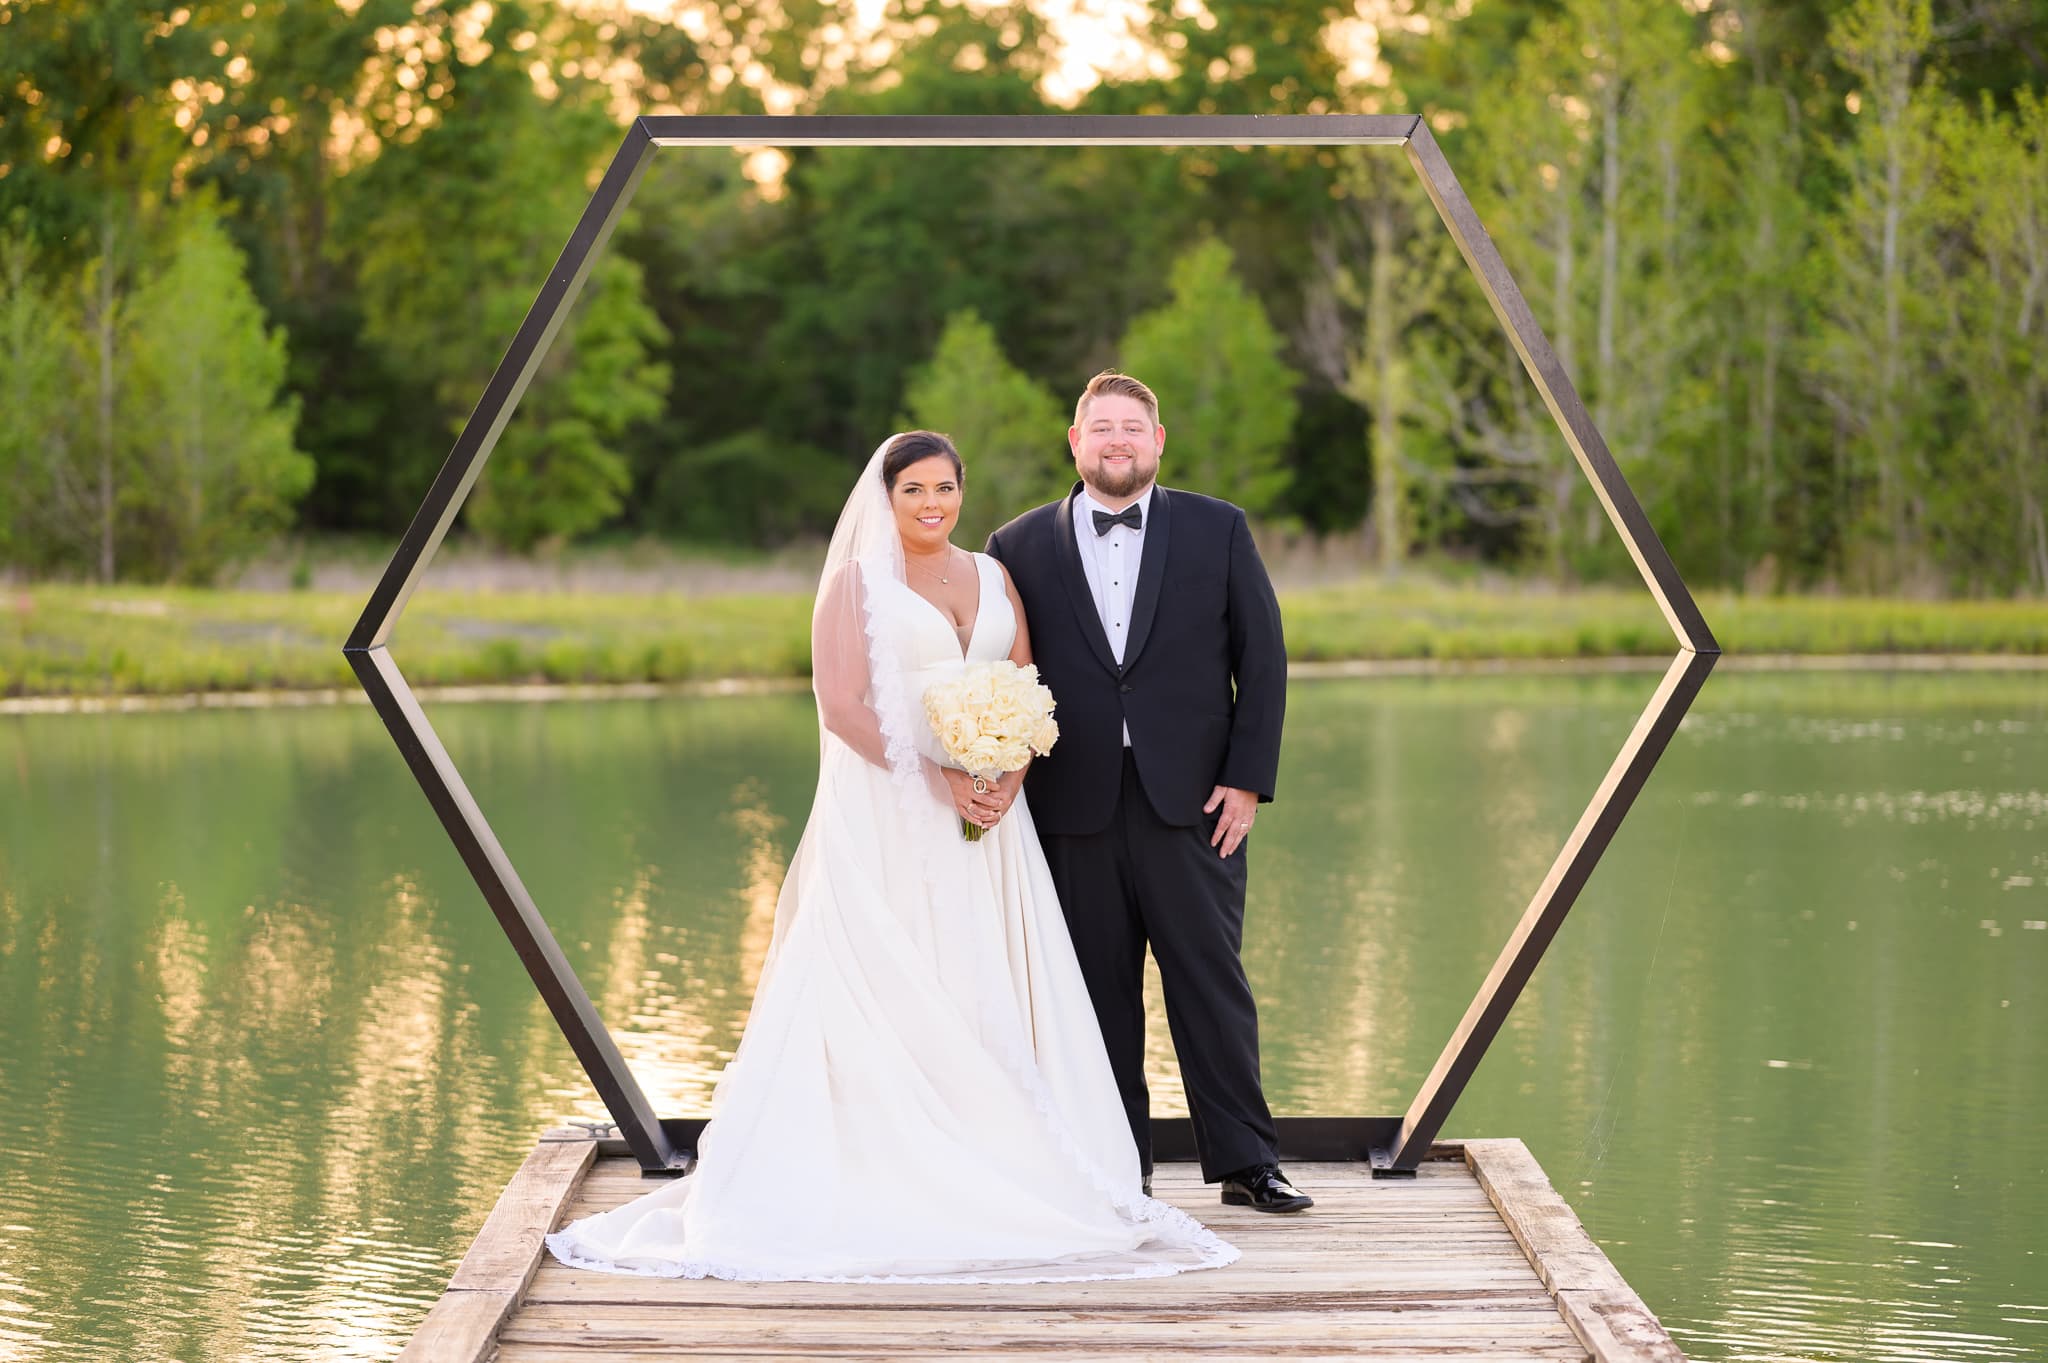 Bride and groom in front of the octagon on the lake - The Venue at White Oaks Farm